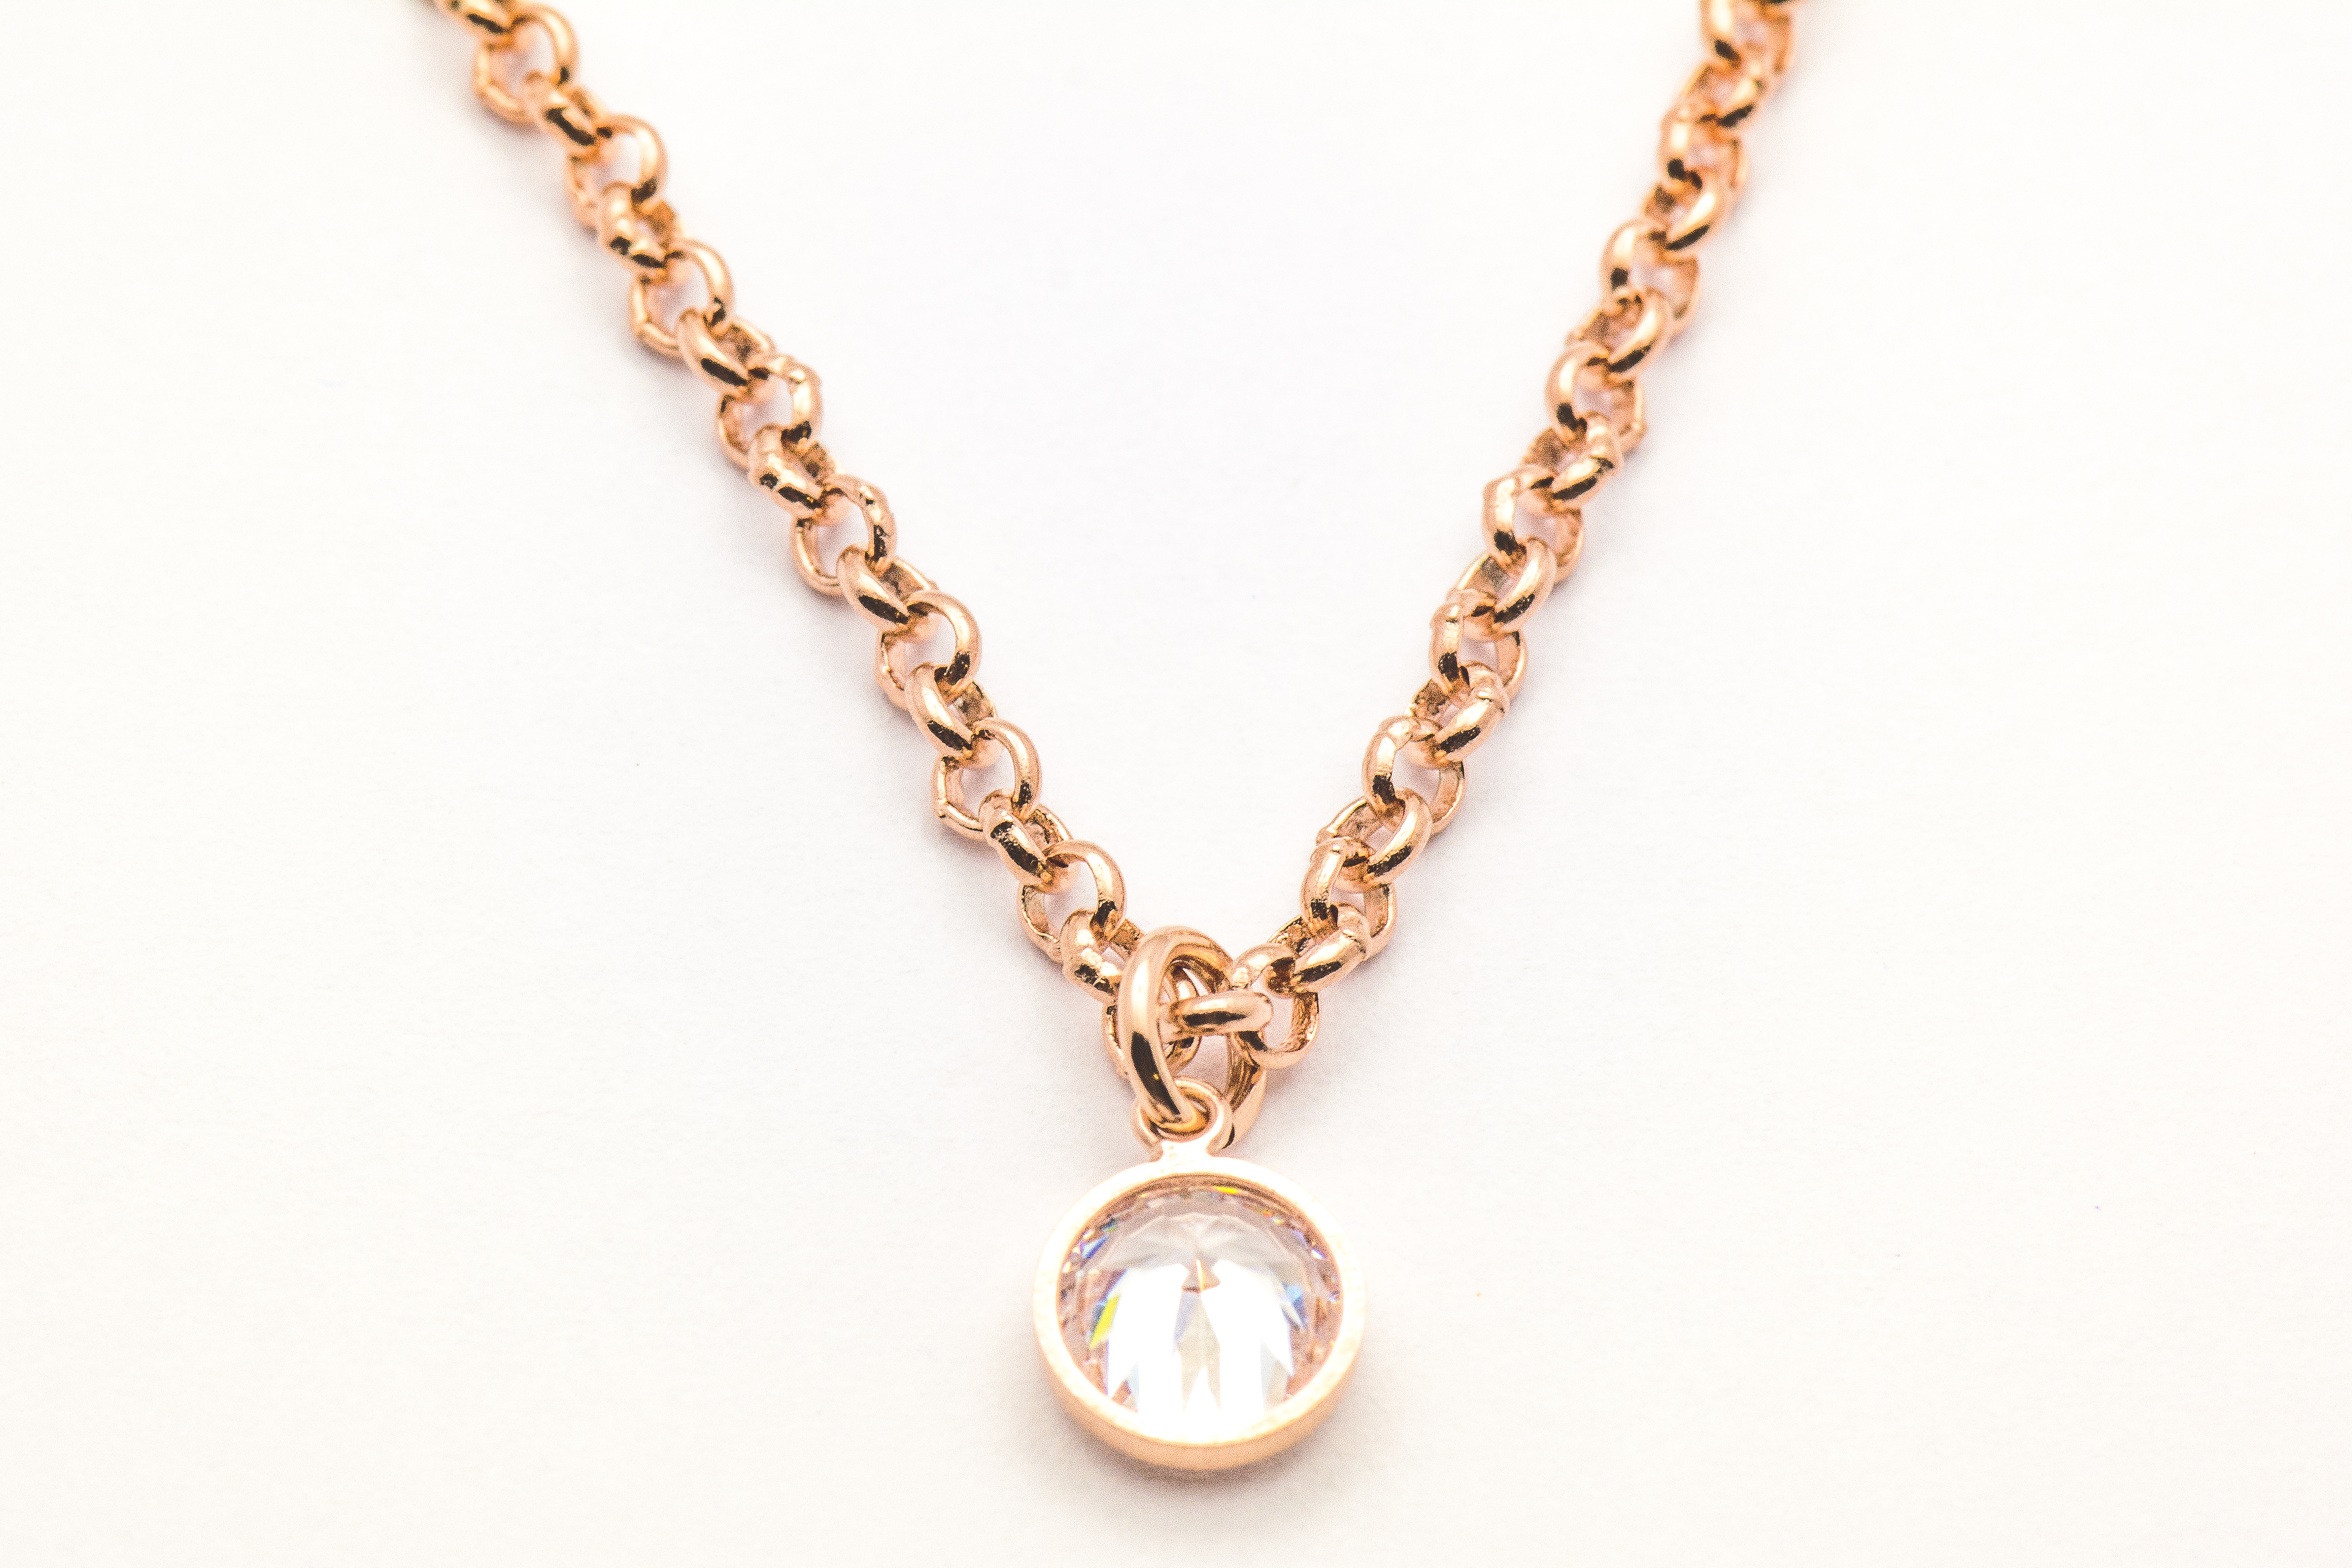 Rose Gold Plated Chain Necklace | Cubic Zirconia - Black ... (6000 x 4000 Pixel)